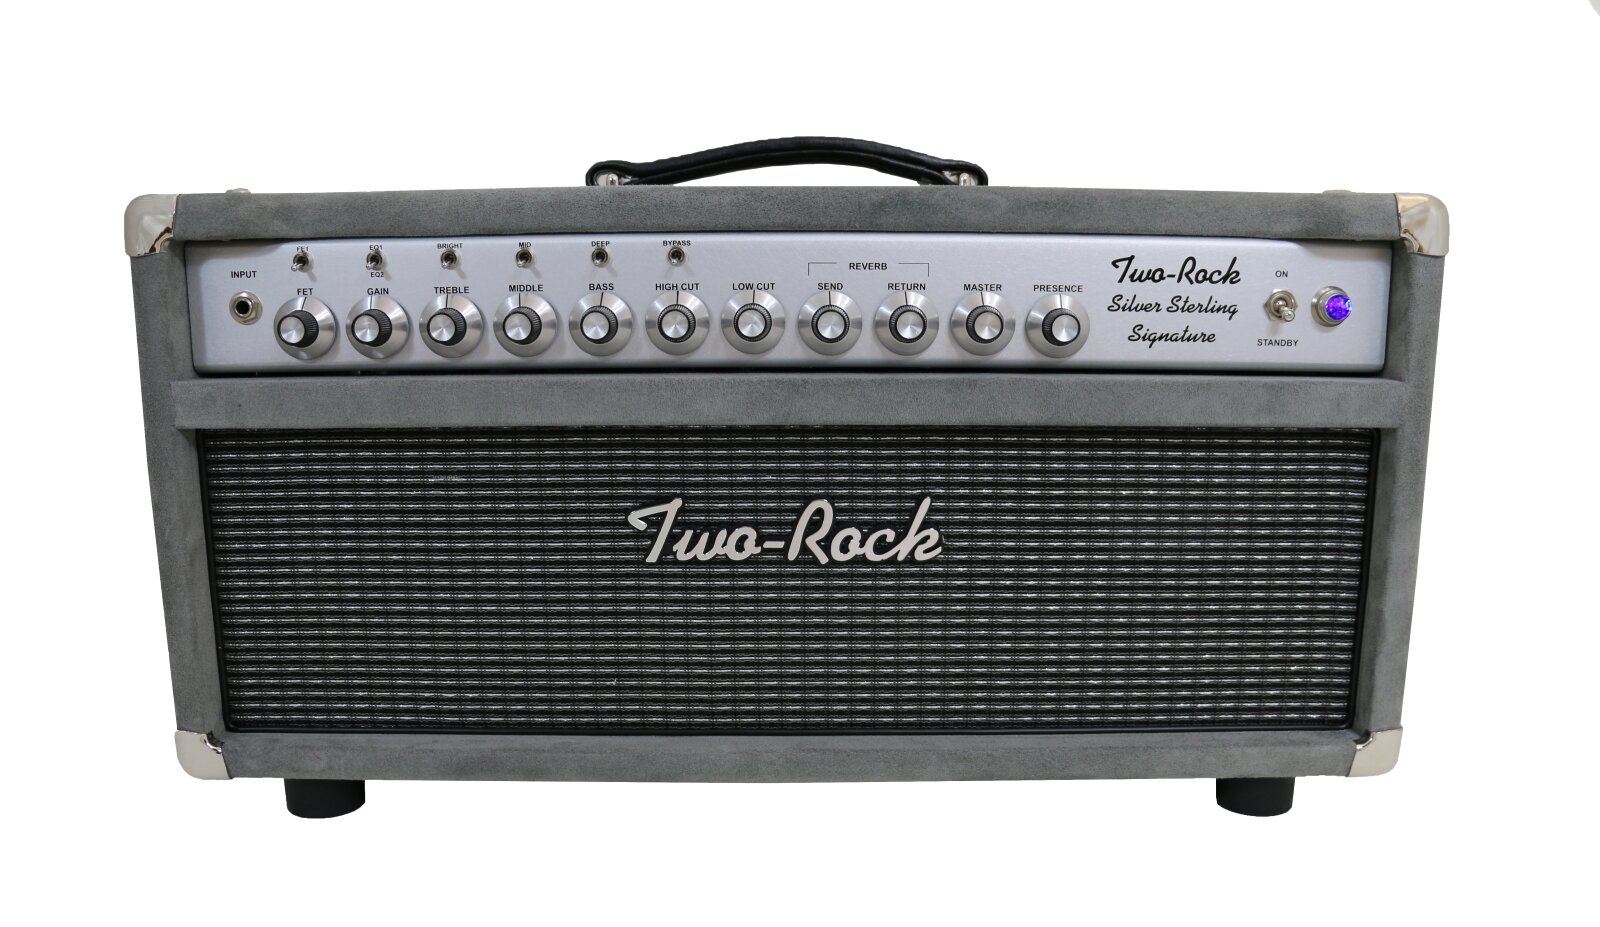 Two-Rock Silver Sterling Signature 100 Watt Head, Silver Anodize, Grill and Knobs, Grey Suede finish : photo 1